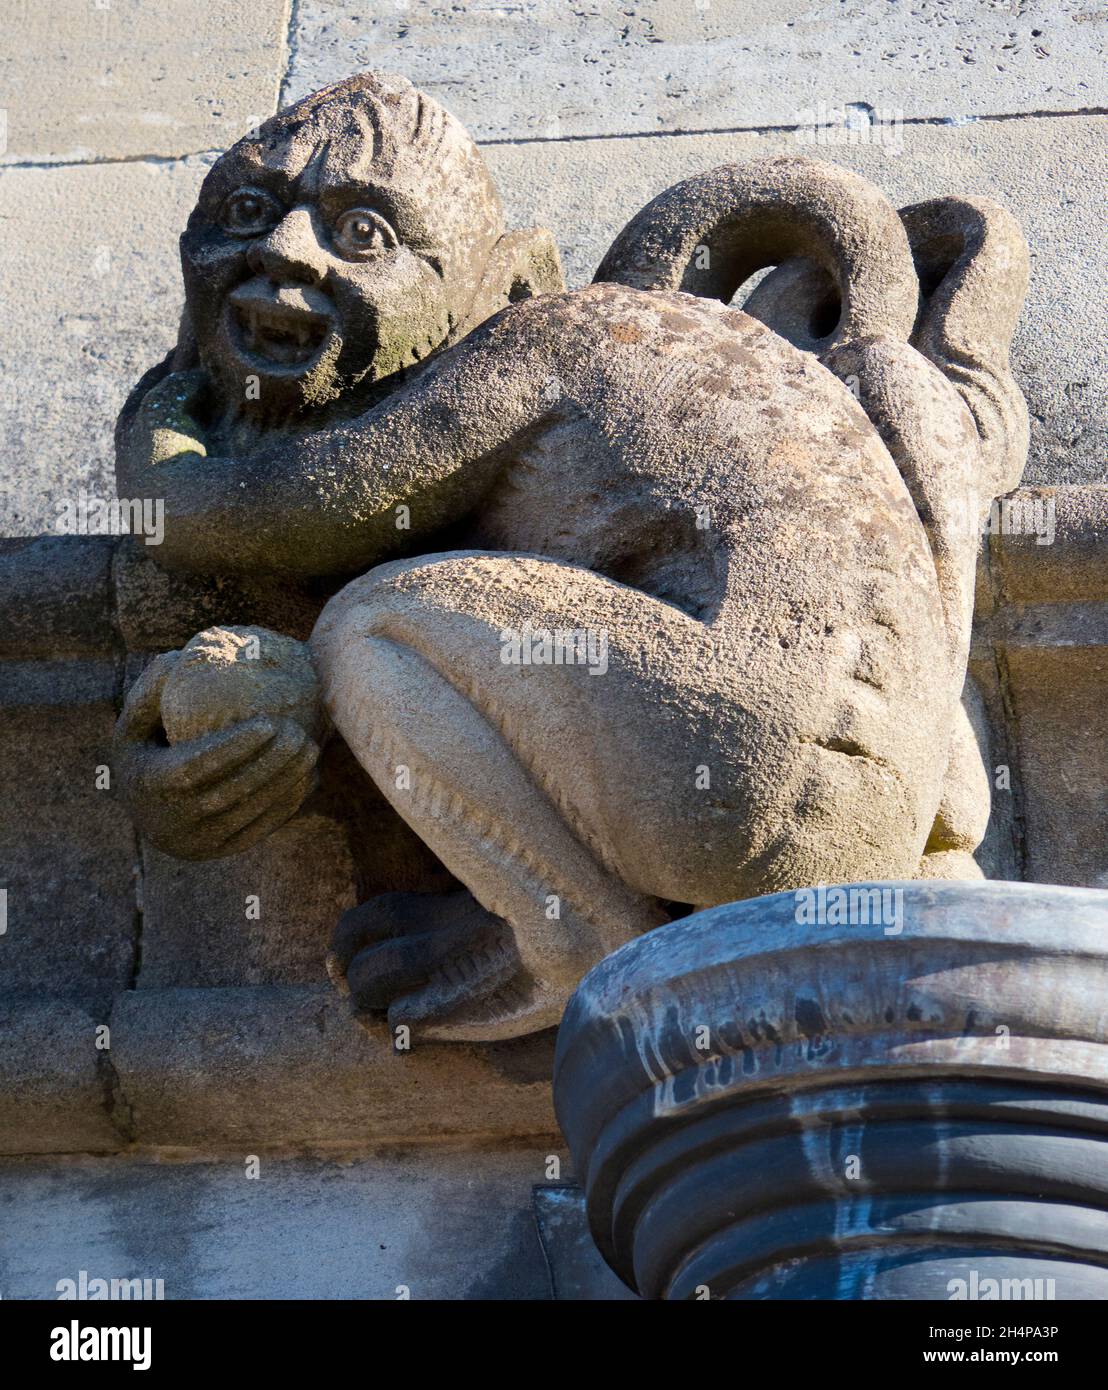 Gargoyles of Magdalen. Magdalen is one of the largest and oldest of the Oxford University Colleges. It also has its very own quirky and imaginative fa Stock Photo